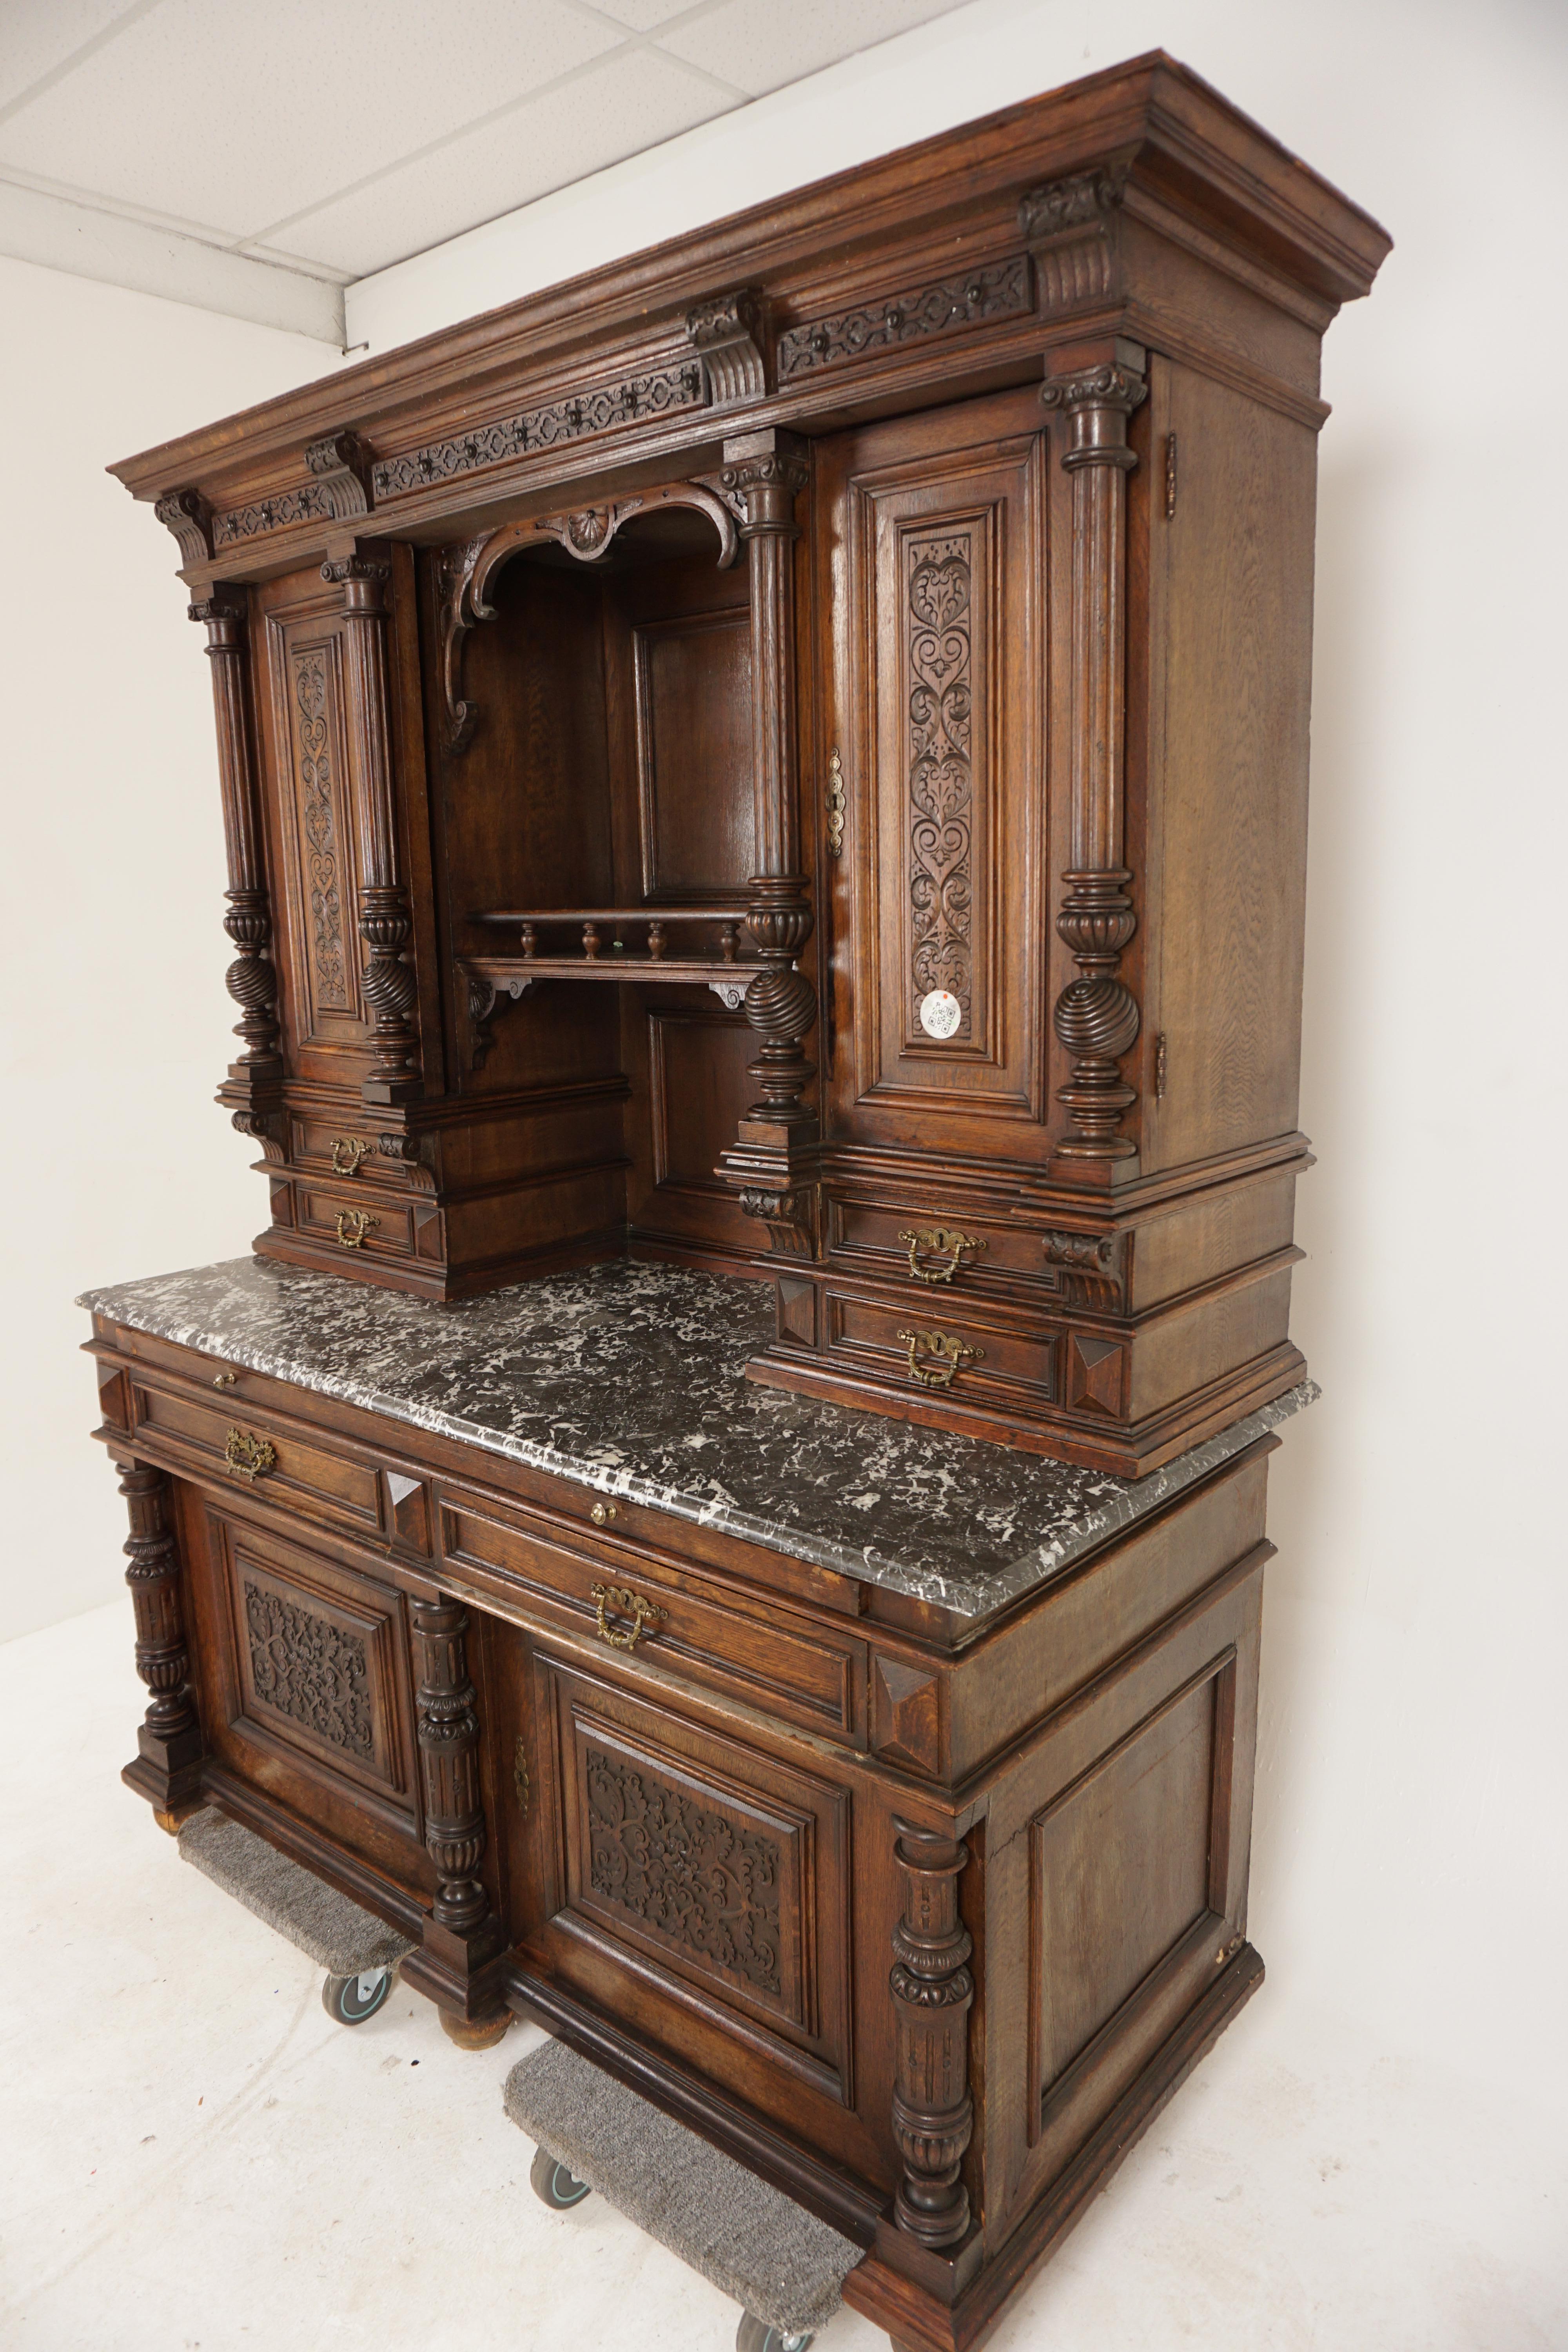 Antique French Oak Renaissance Buffet Hutch, Cabinet, Sideboard, France 1900, H646

France 1900
Solid Oak
Original finish
Large overhanging cornice
Open central shelf
Flanked by a pair of carved panelled doors which open to reveal single interior